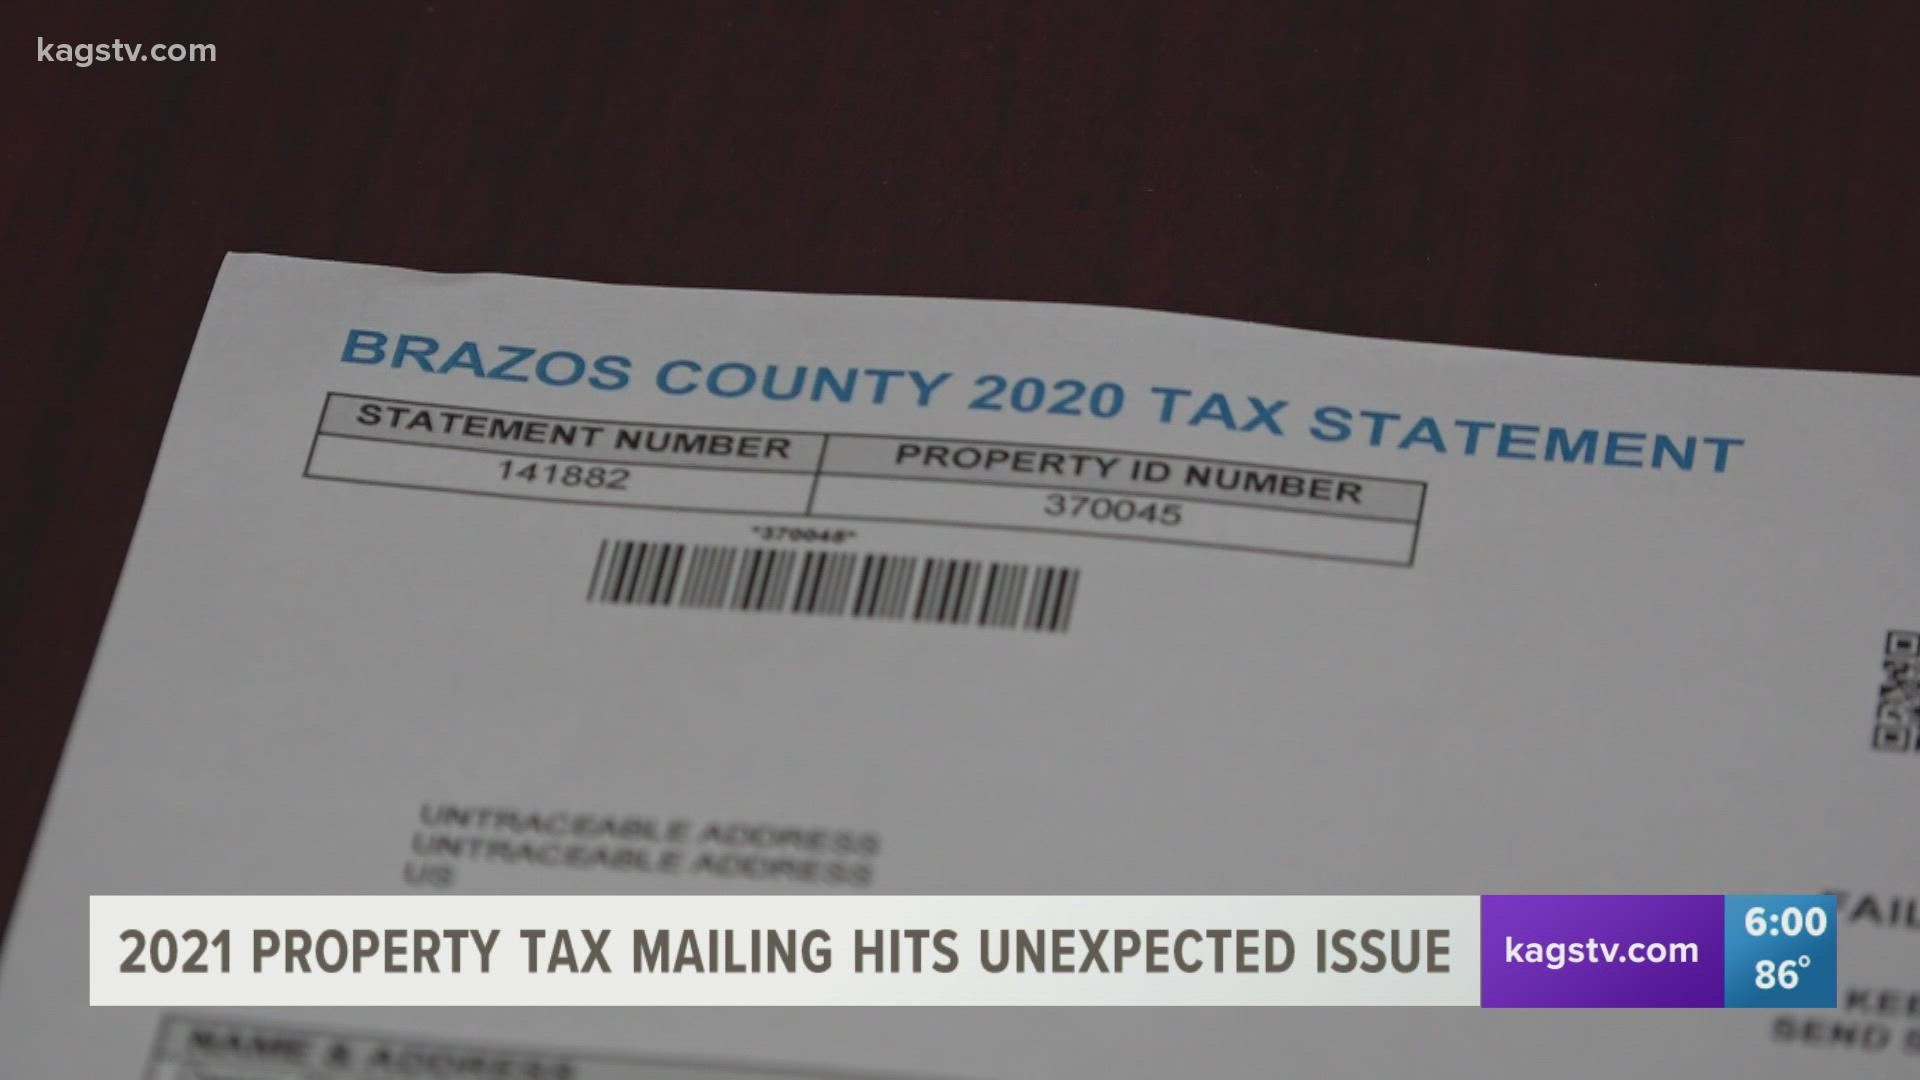 The Brazos County tax office was made aware of the mistake after owners received the forms. They are working to correct the problem.